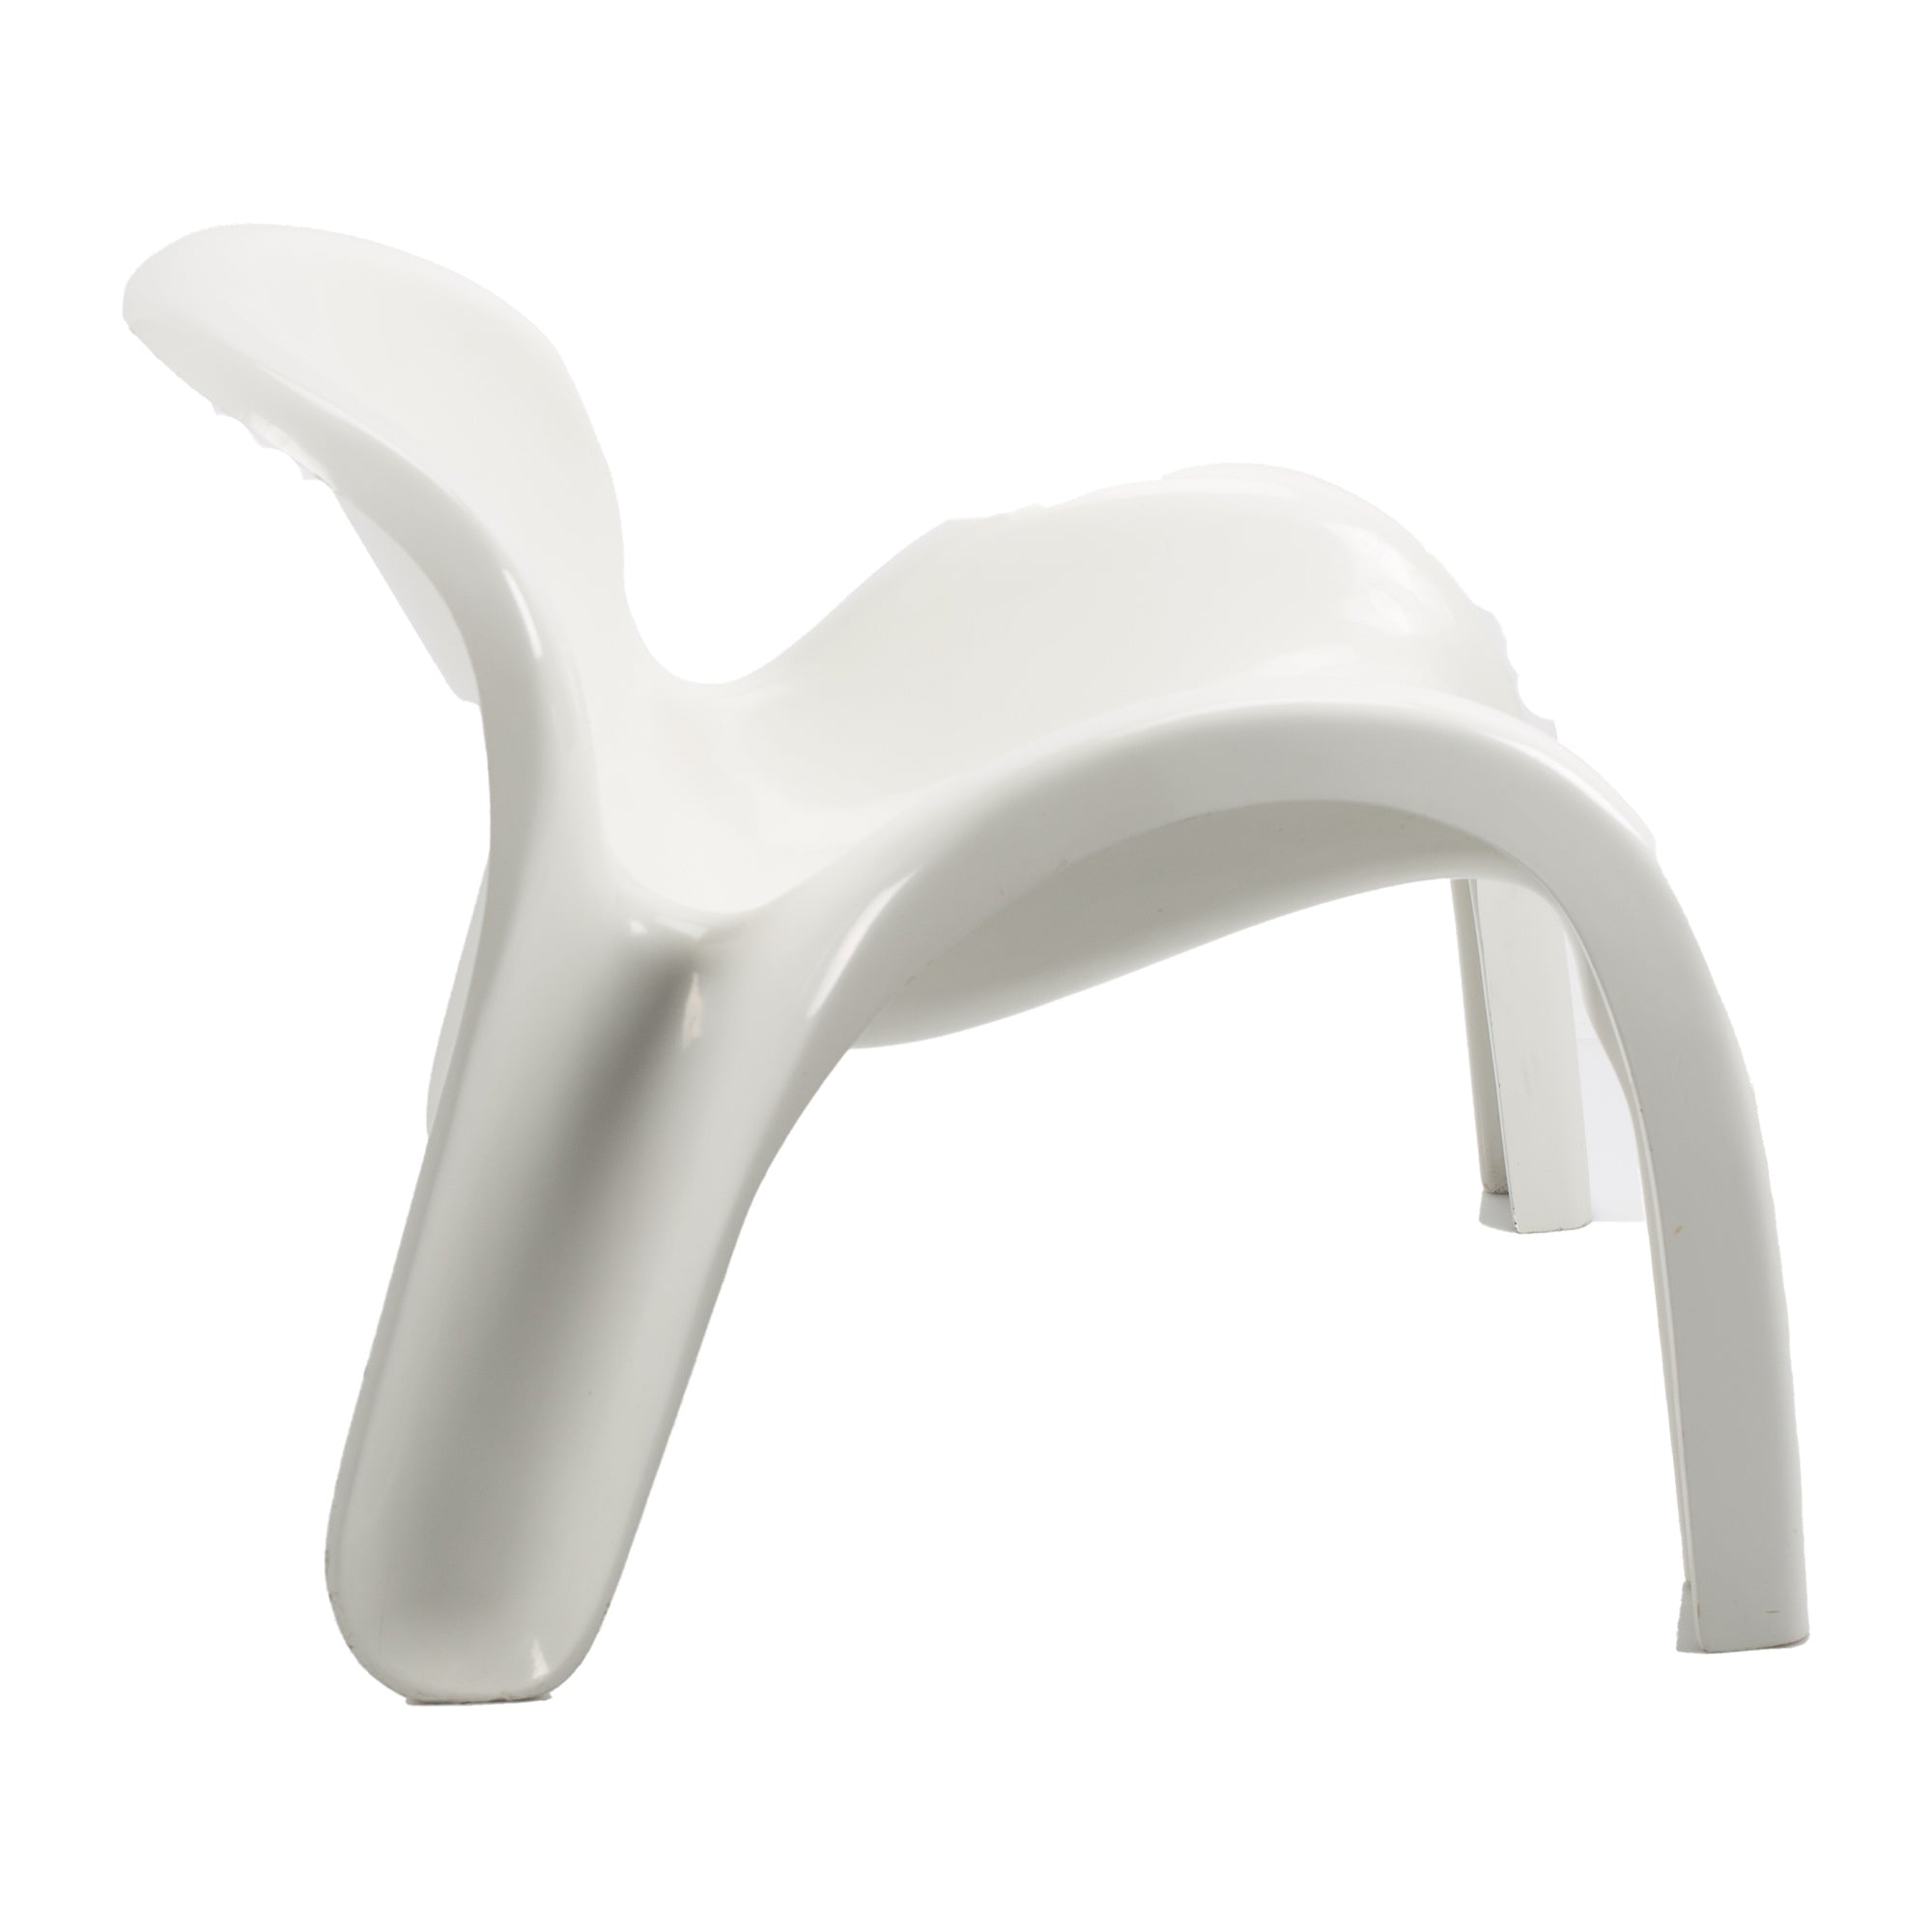 White GN2 Chair by Peter Ghyczy for Reuter's Form and Life